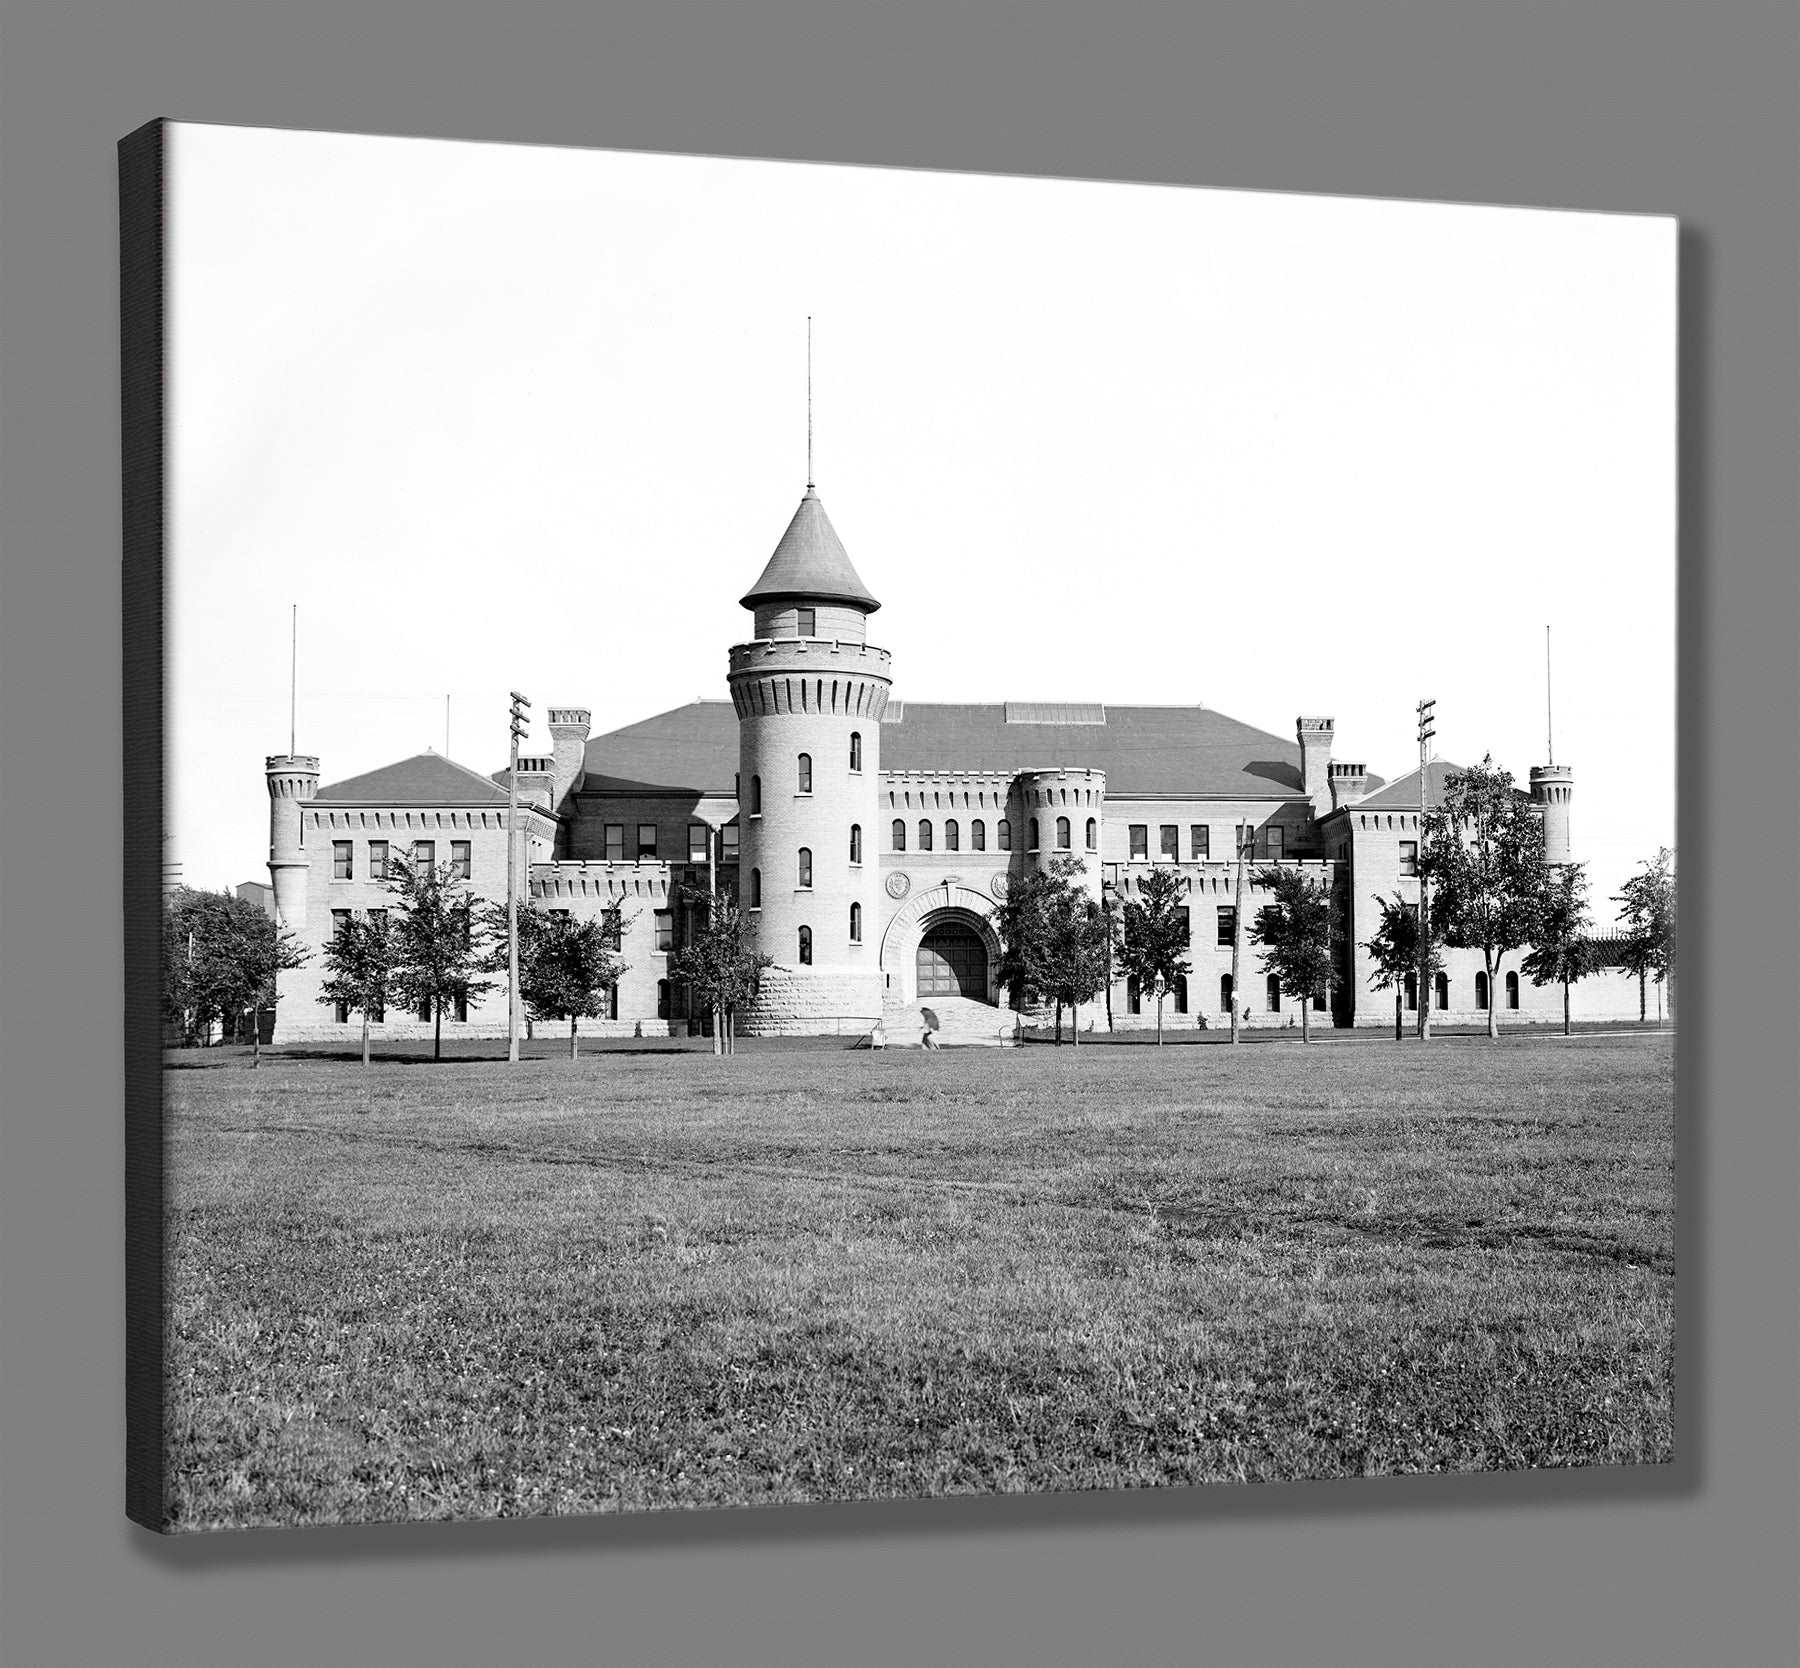 A fine art canvas print of a photograph of the Armory at the University of Minnesota